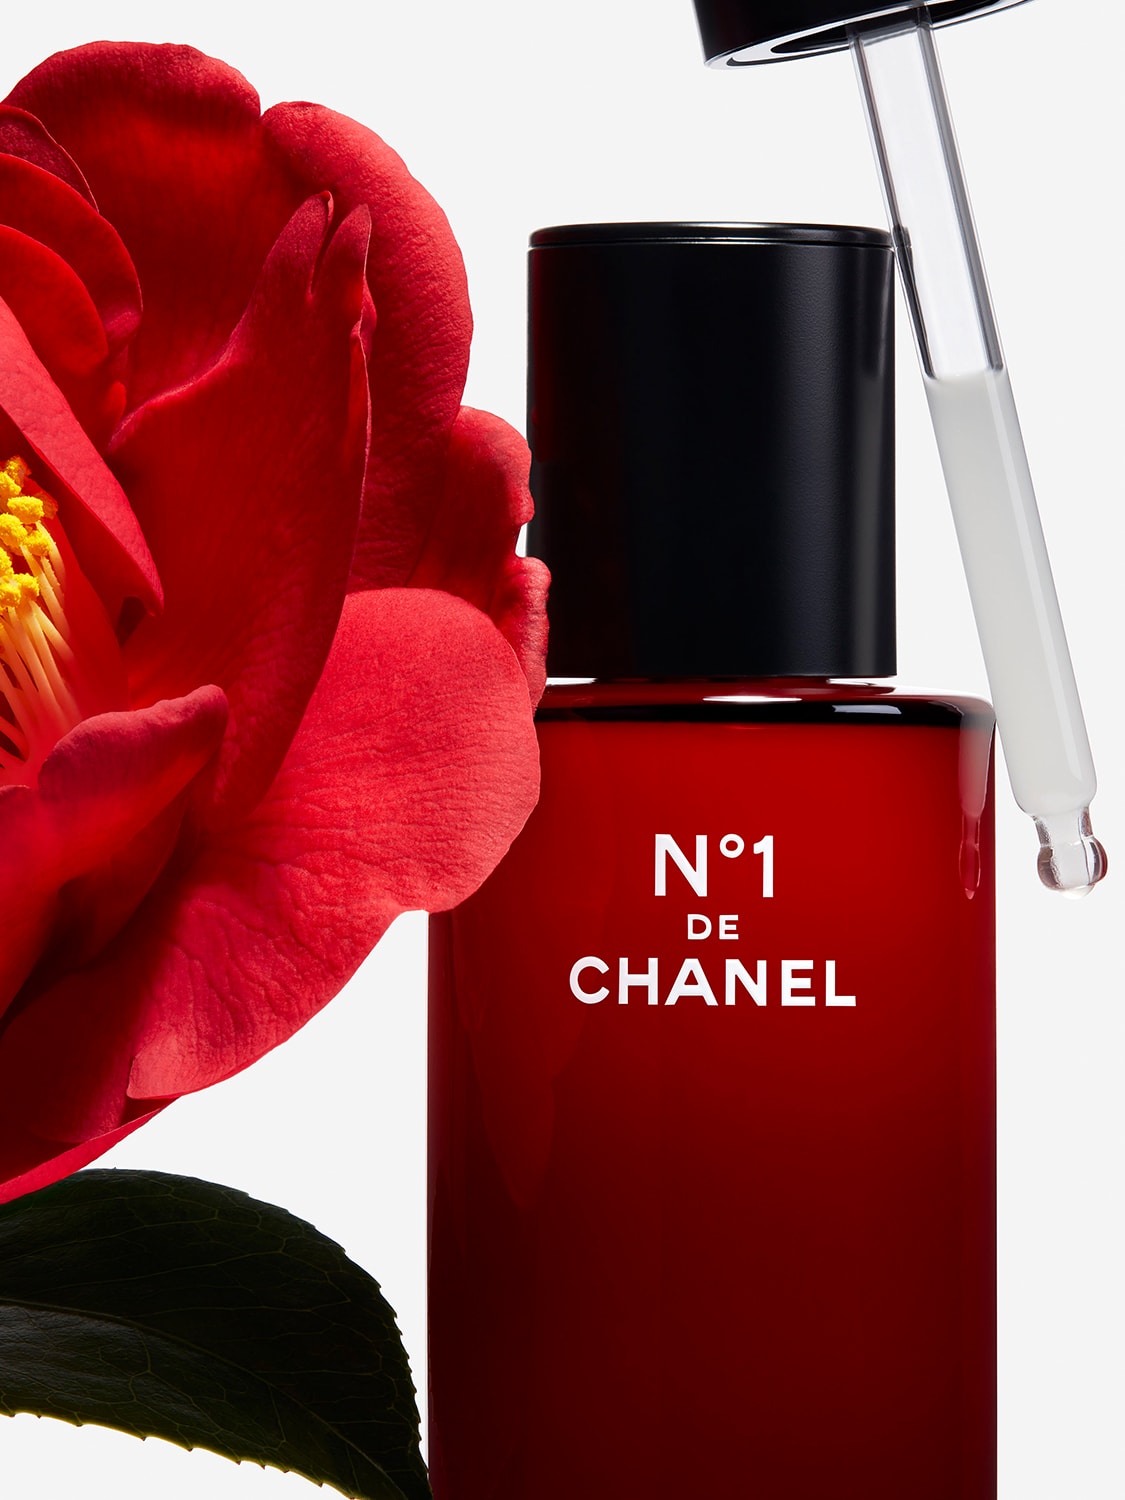 A breakdown of the new Gabrielle Chanel fragrance by Chanel